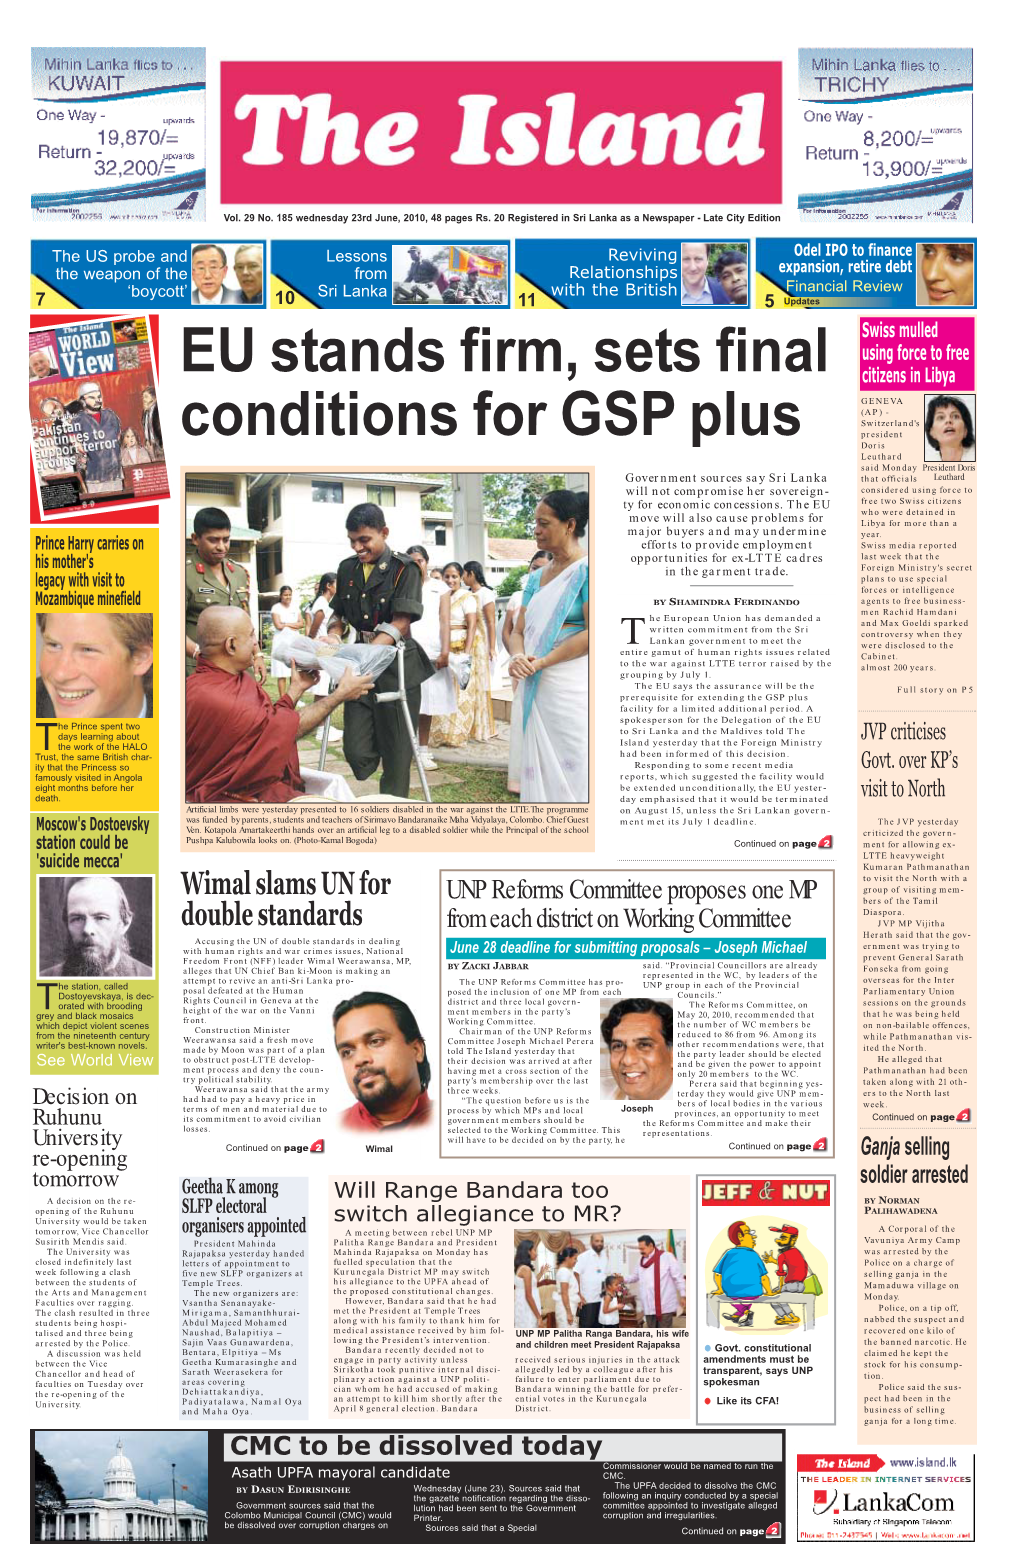 EU Stands Firm, Sets Final Conditions for GSP Plus